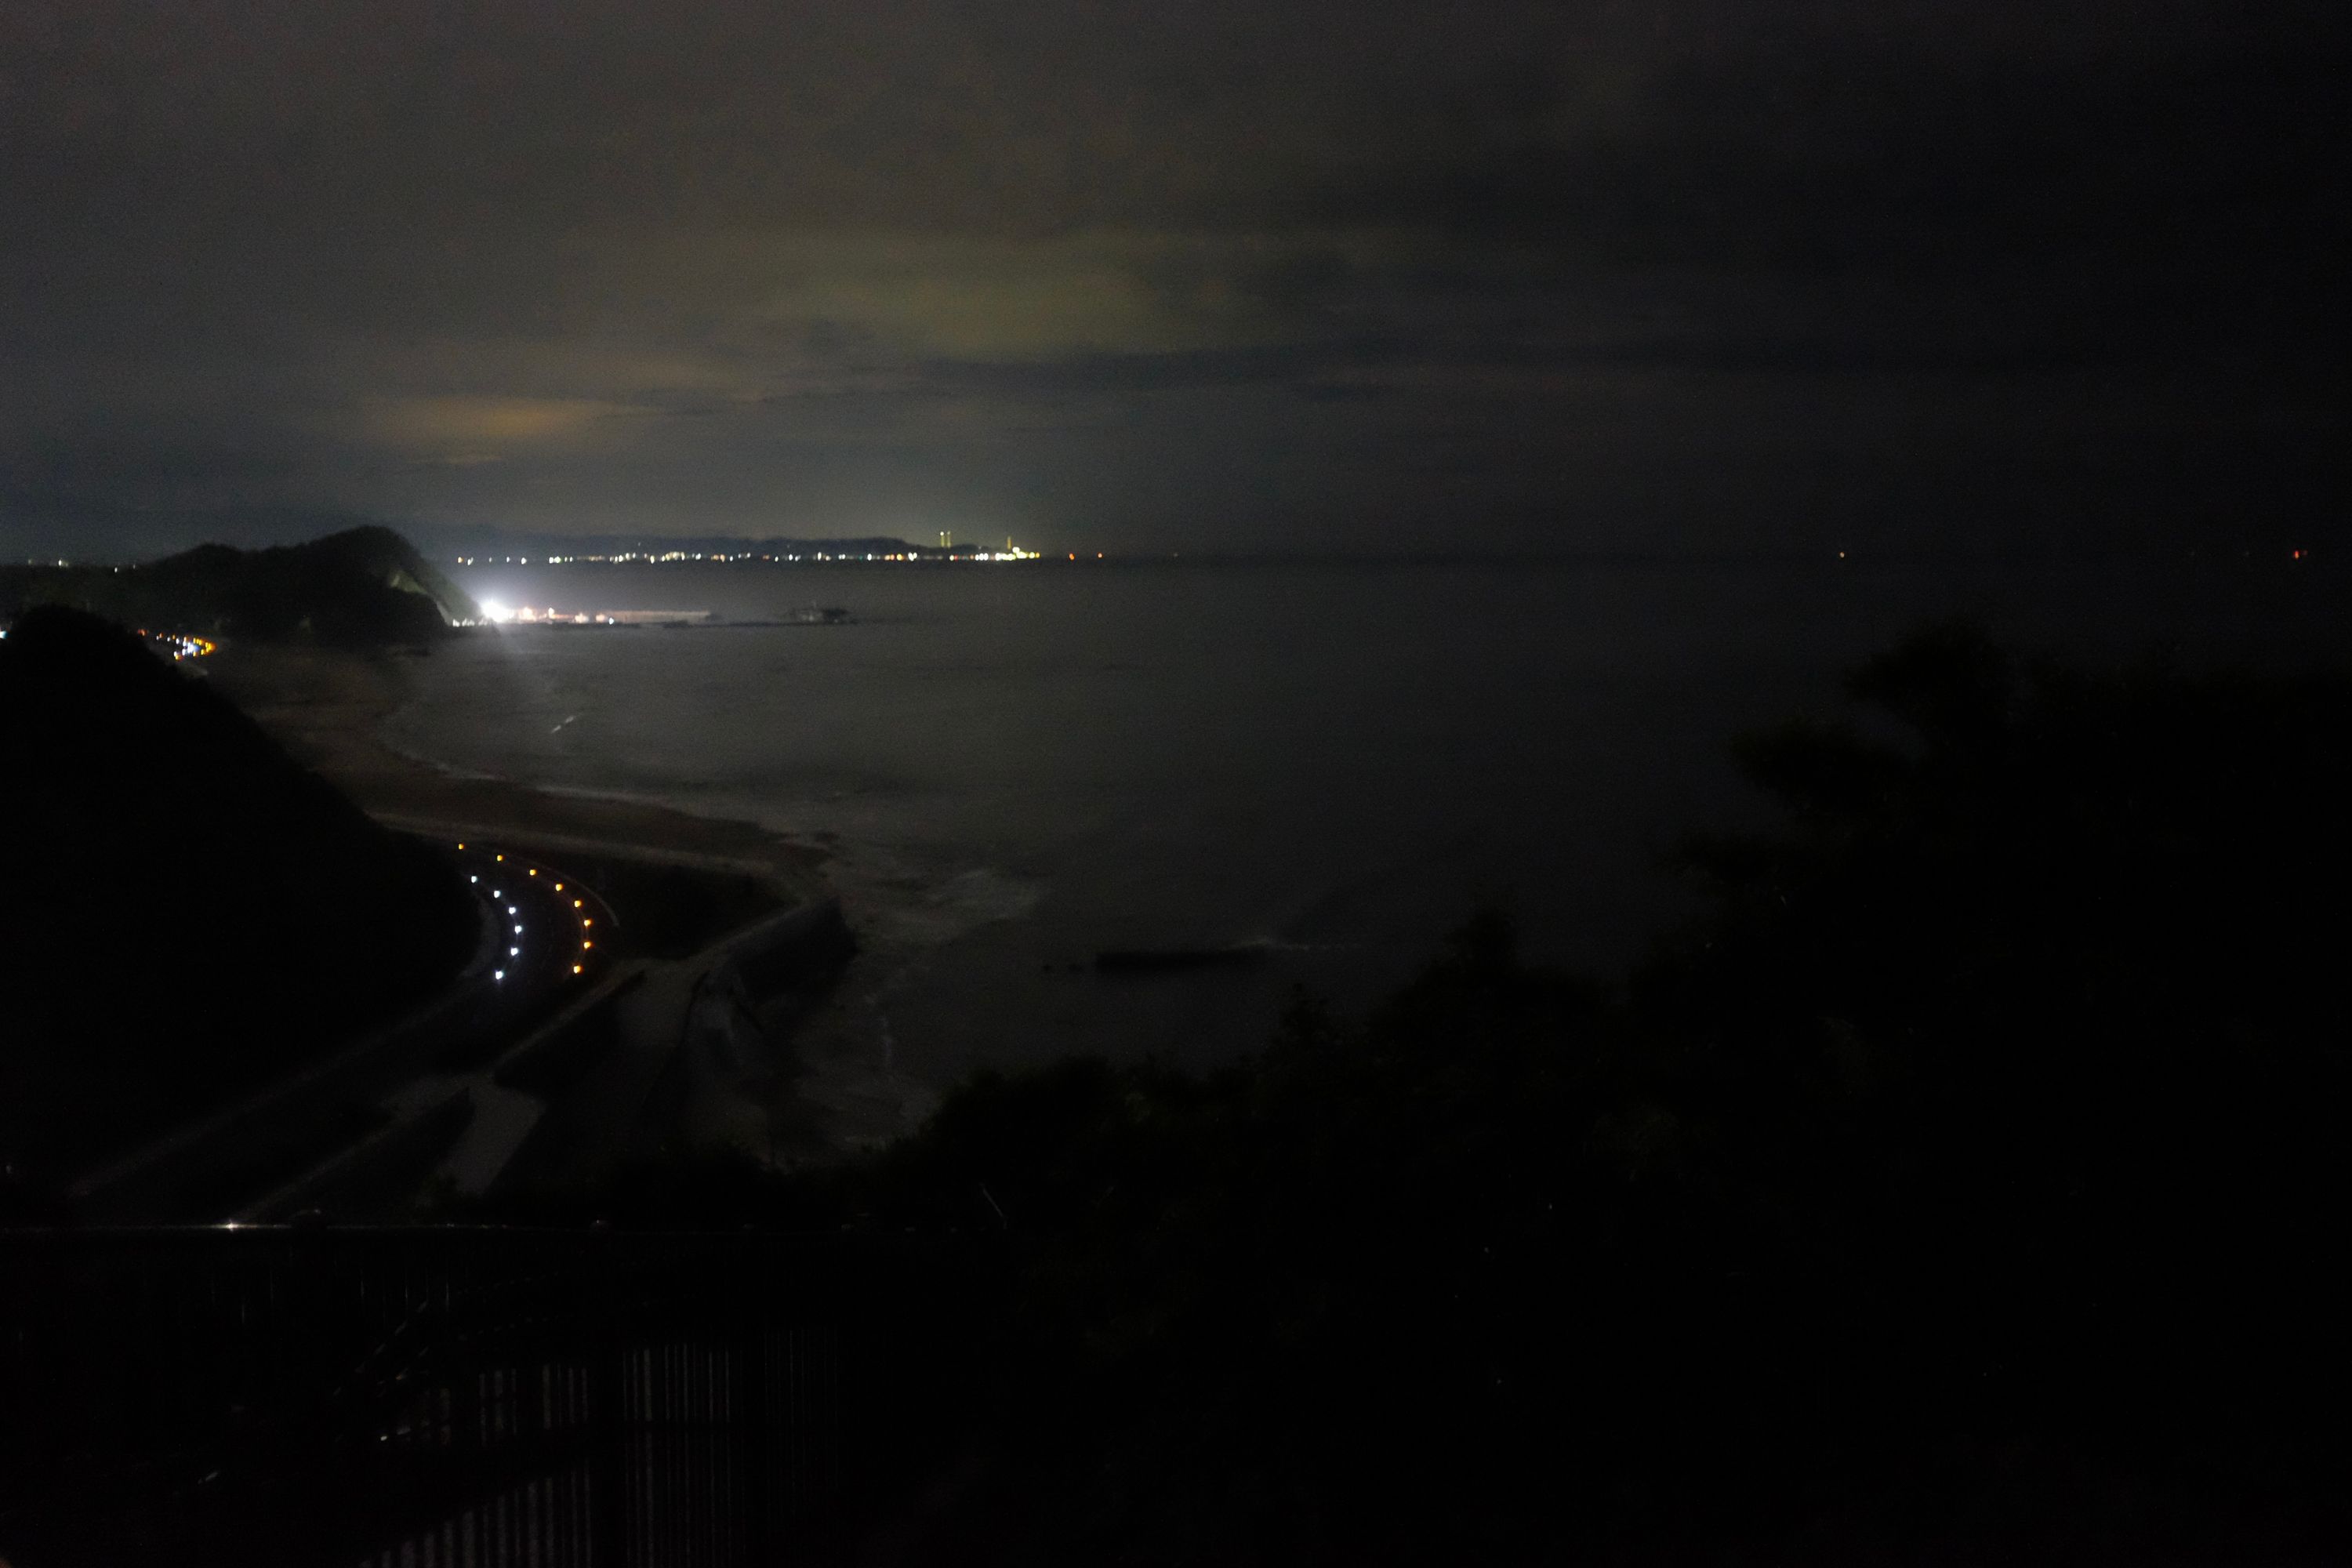 Looking out over the Pacific Ocean at night.